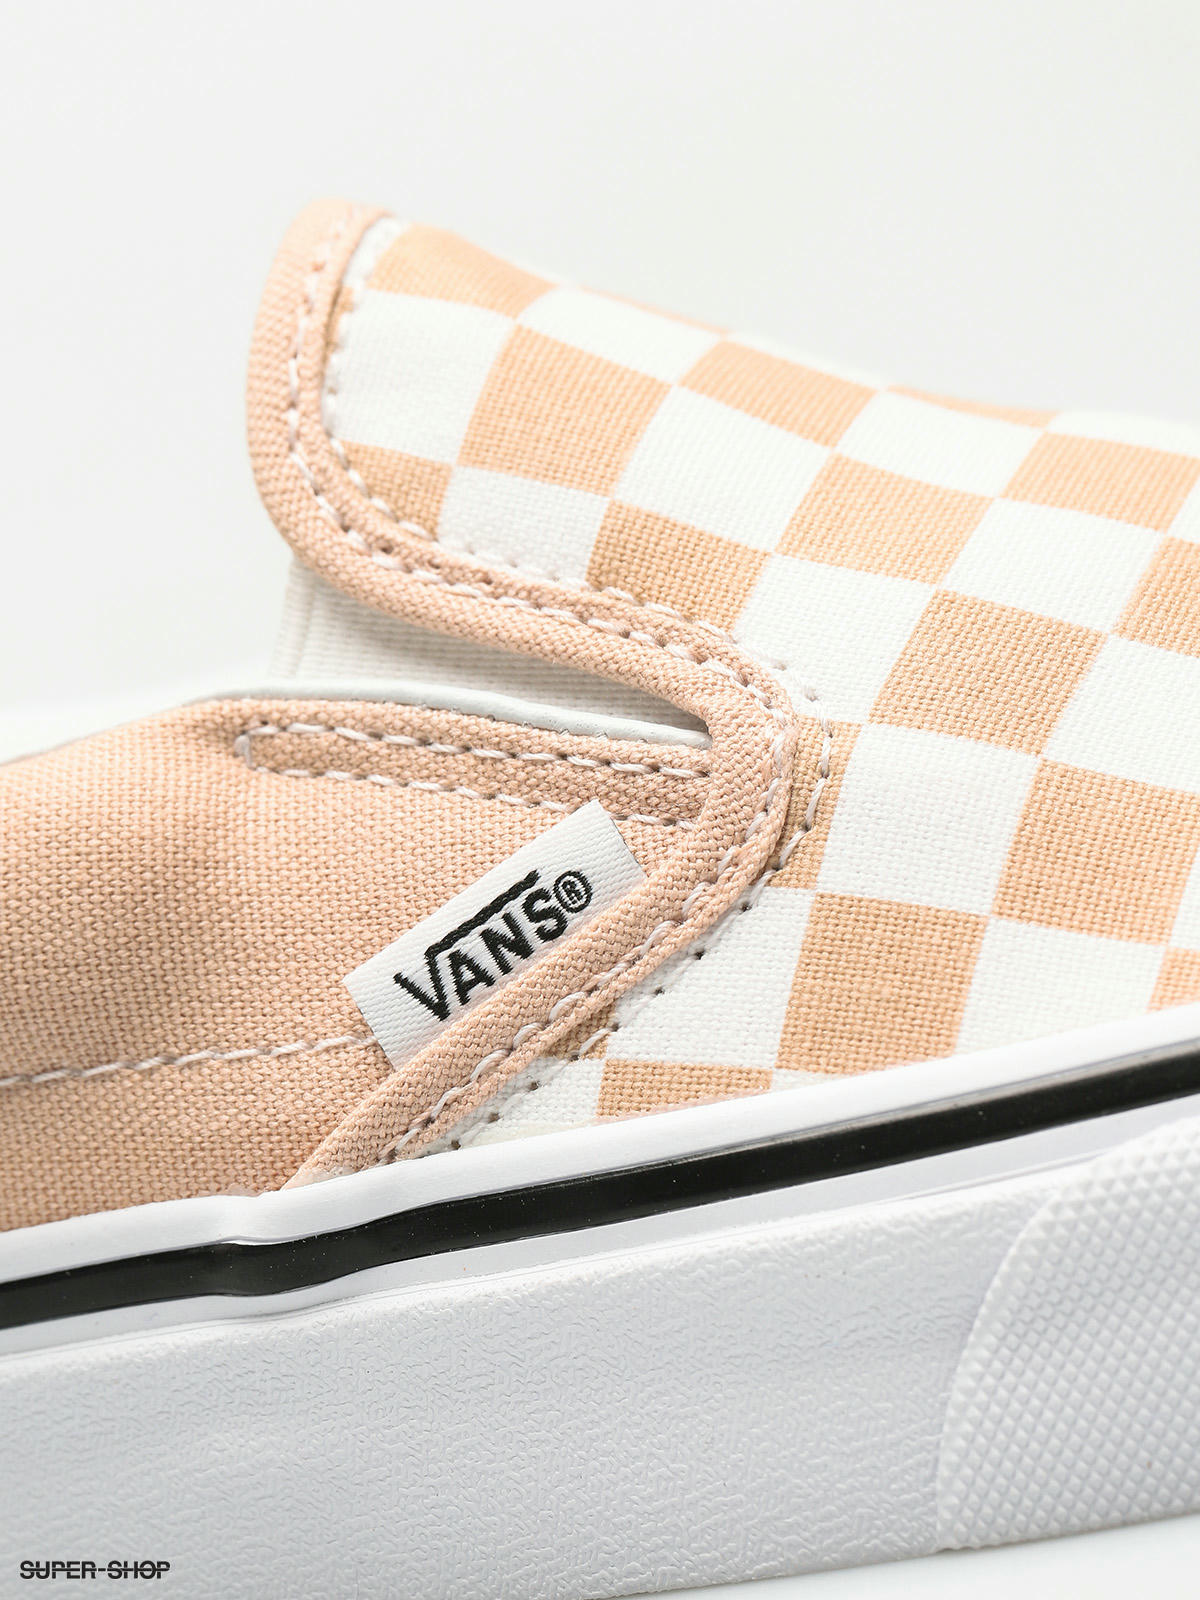 frappe and white checkered vans